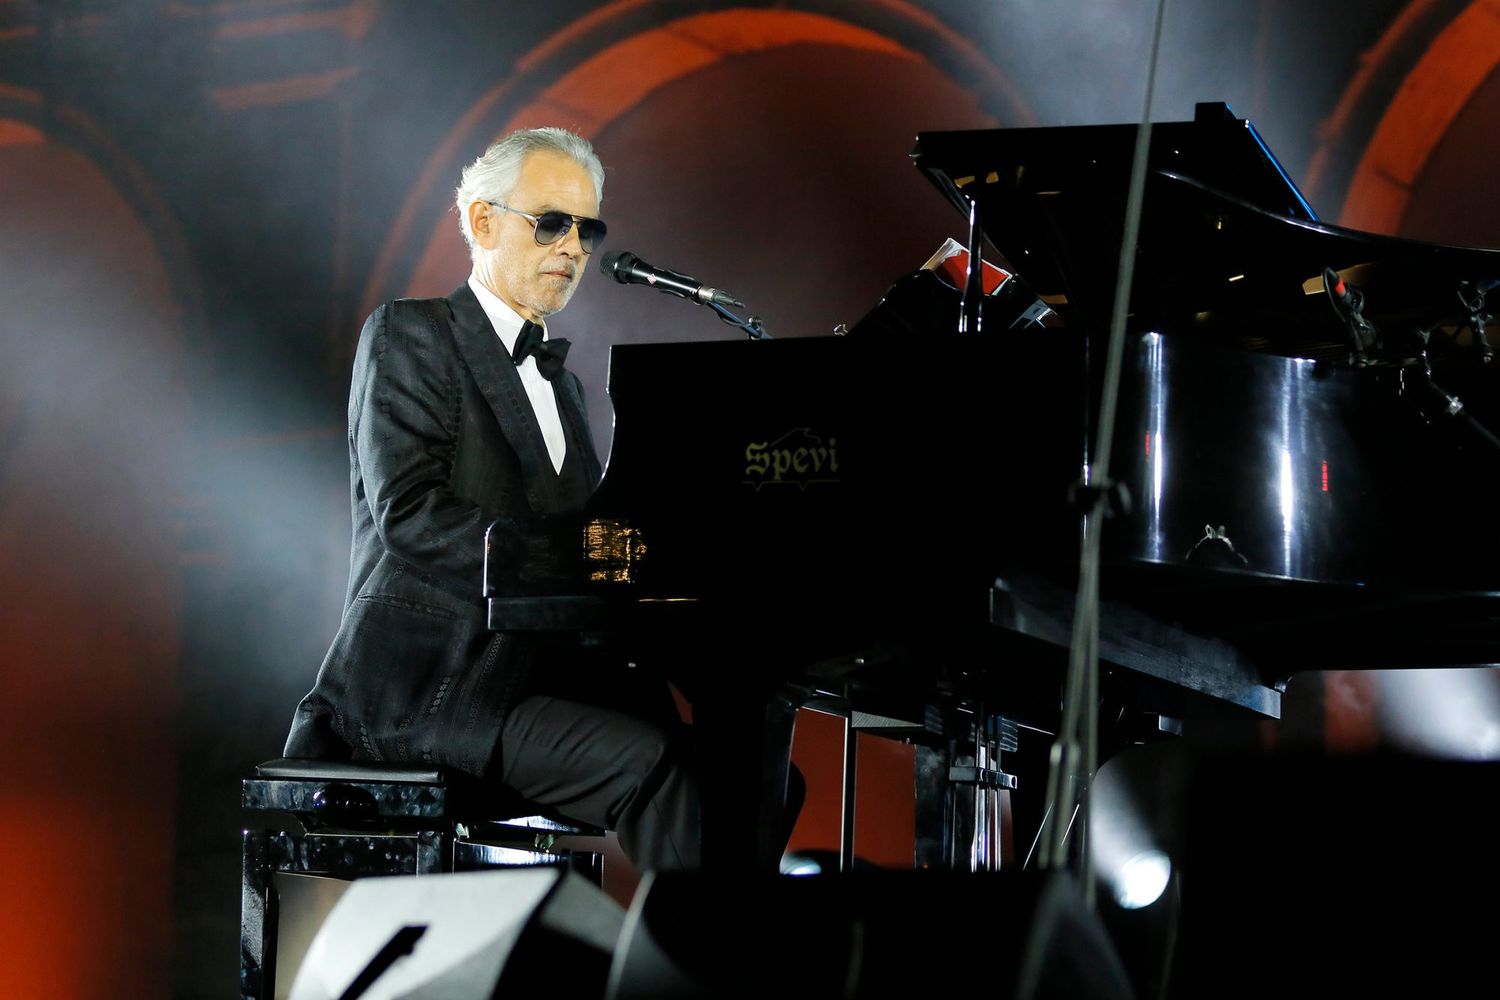 Andrea Bocelli performs during the party at the LuisaViaRoma for Unicef event at La Certosa di San Giacomo on August 29, 2020